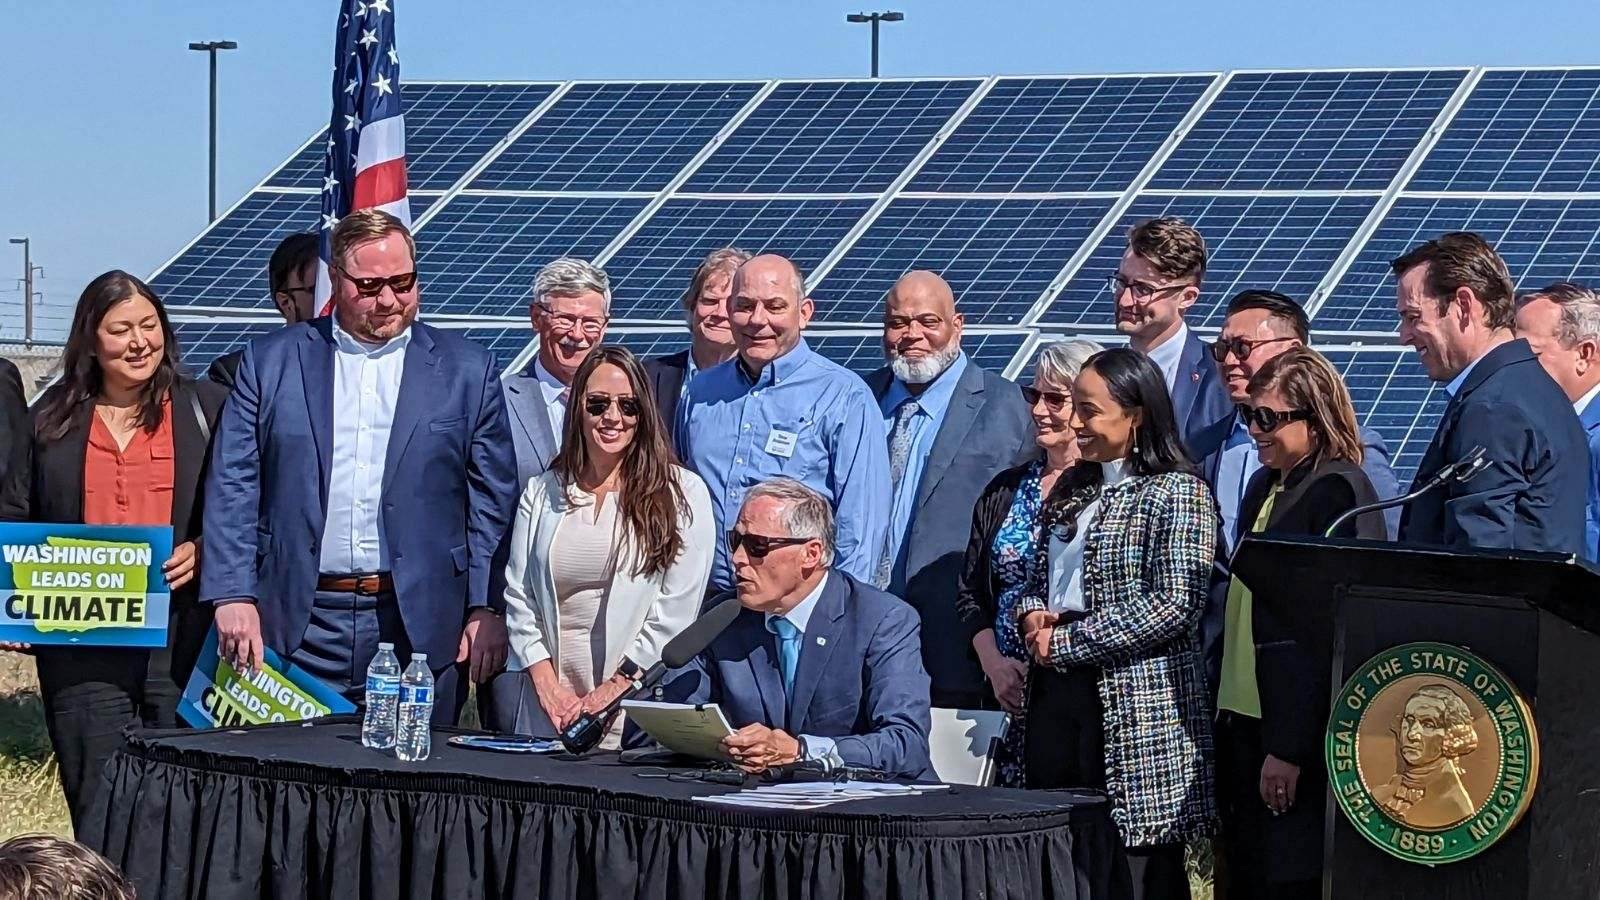 Photo from Futurewise shows Governor Inslee signing climate legislation in Washington State, with supporters in the background